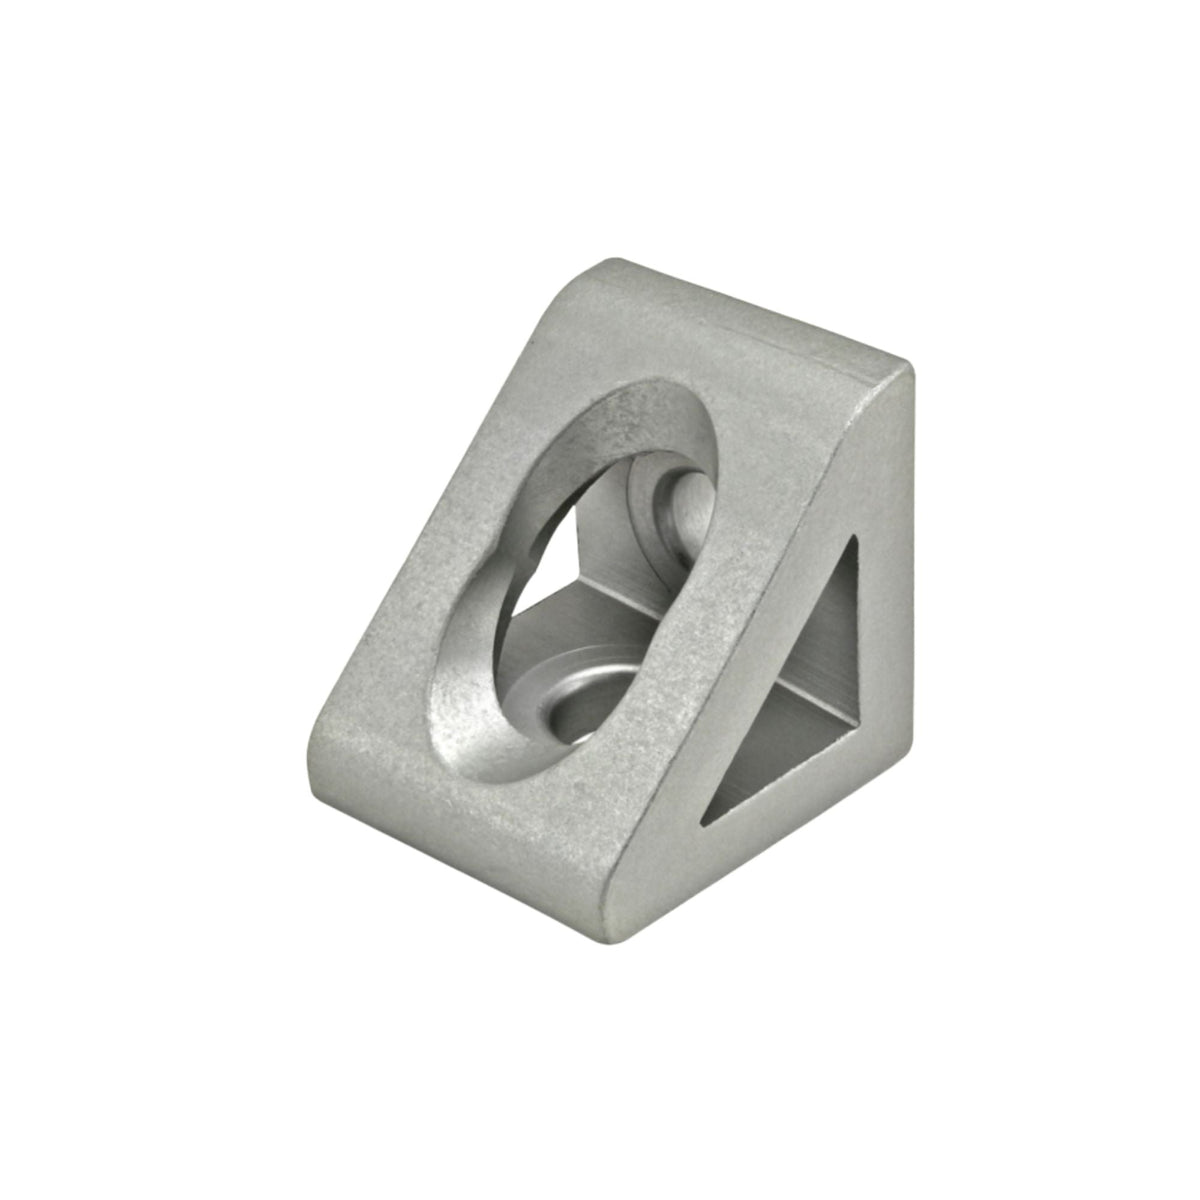 triangle shaped corner bracket with a single mounting hole on each of the three sides